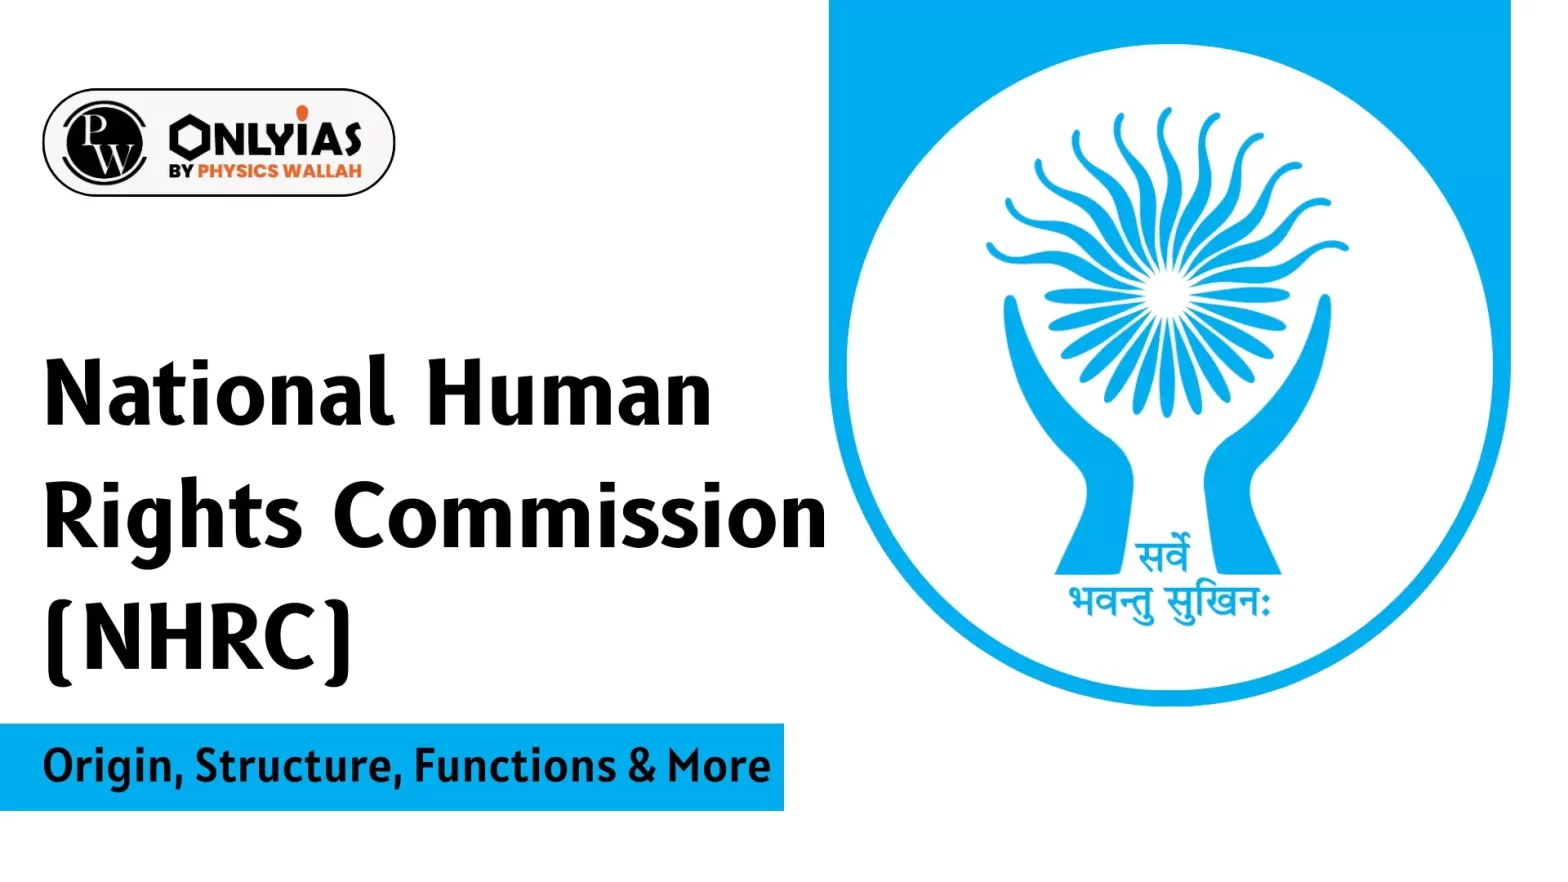 National Human Rights Commission (NHRC): Origin, Structure, Functions & More